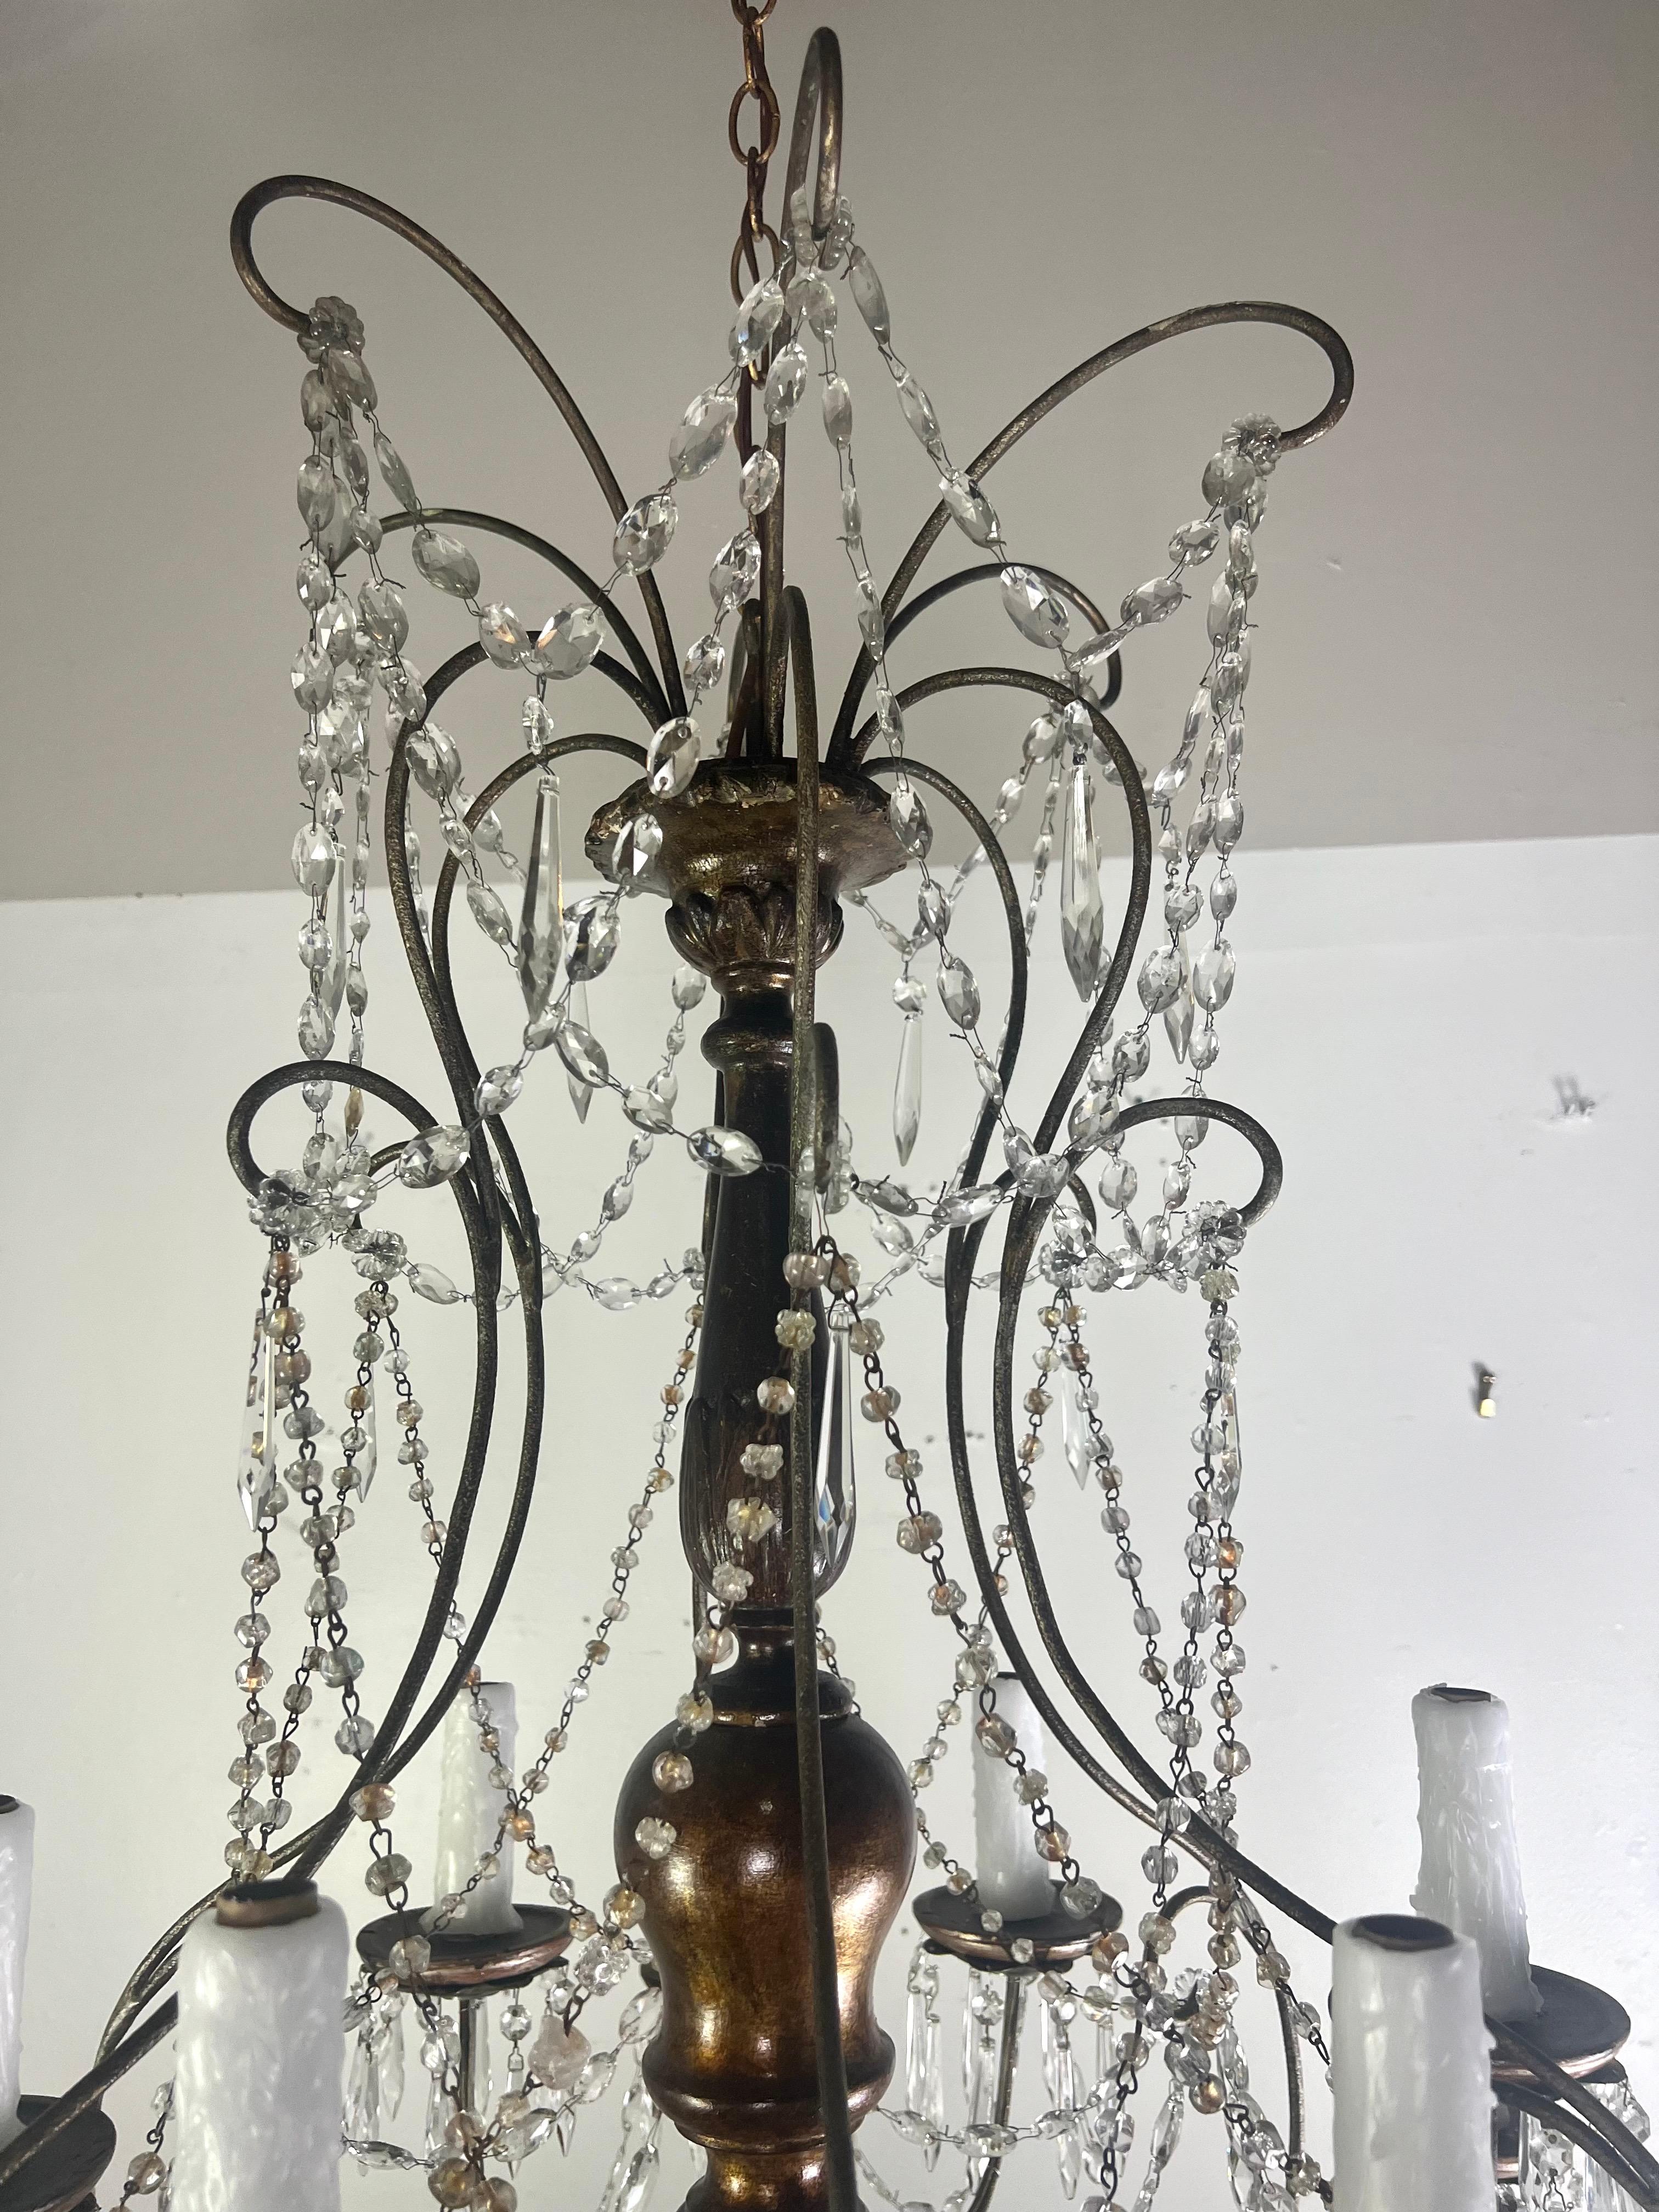 Italian (12) Light Gilt Wood & Crystal Chandelier C. 1930 In Good Condition For Sale In Los Angeles, CA